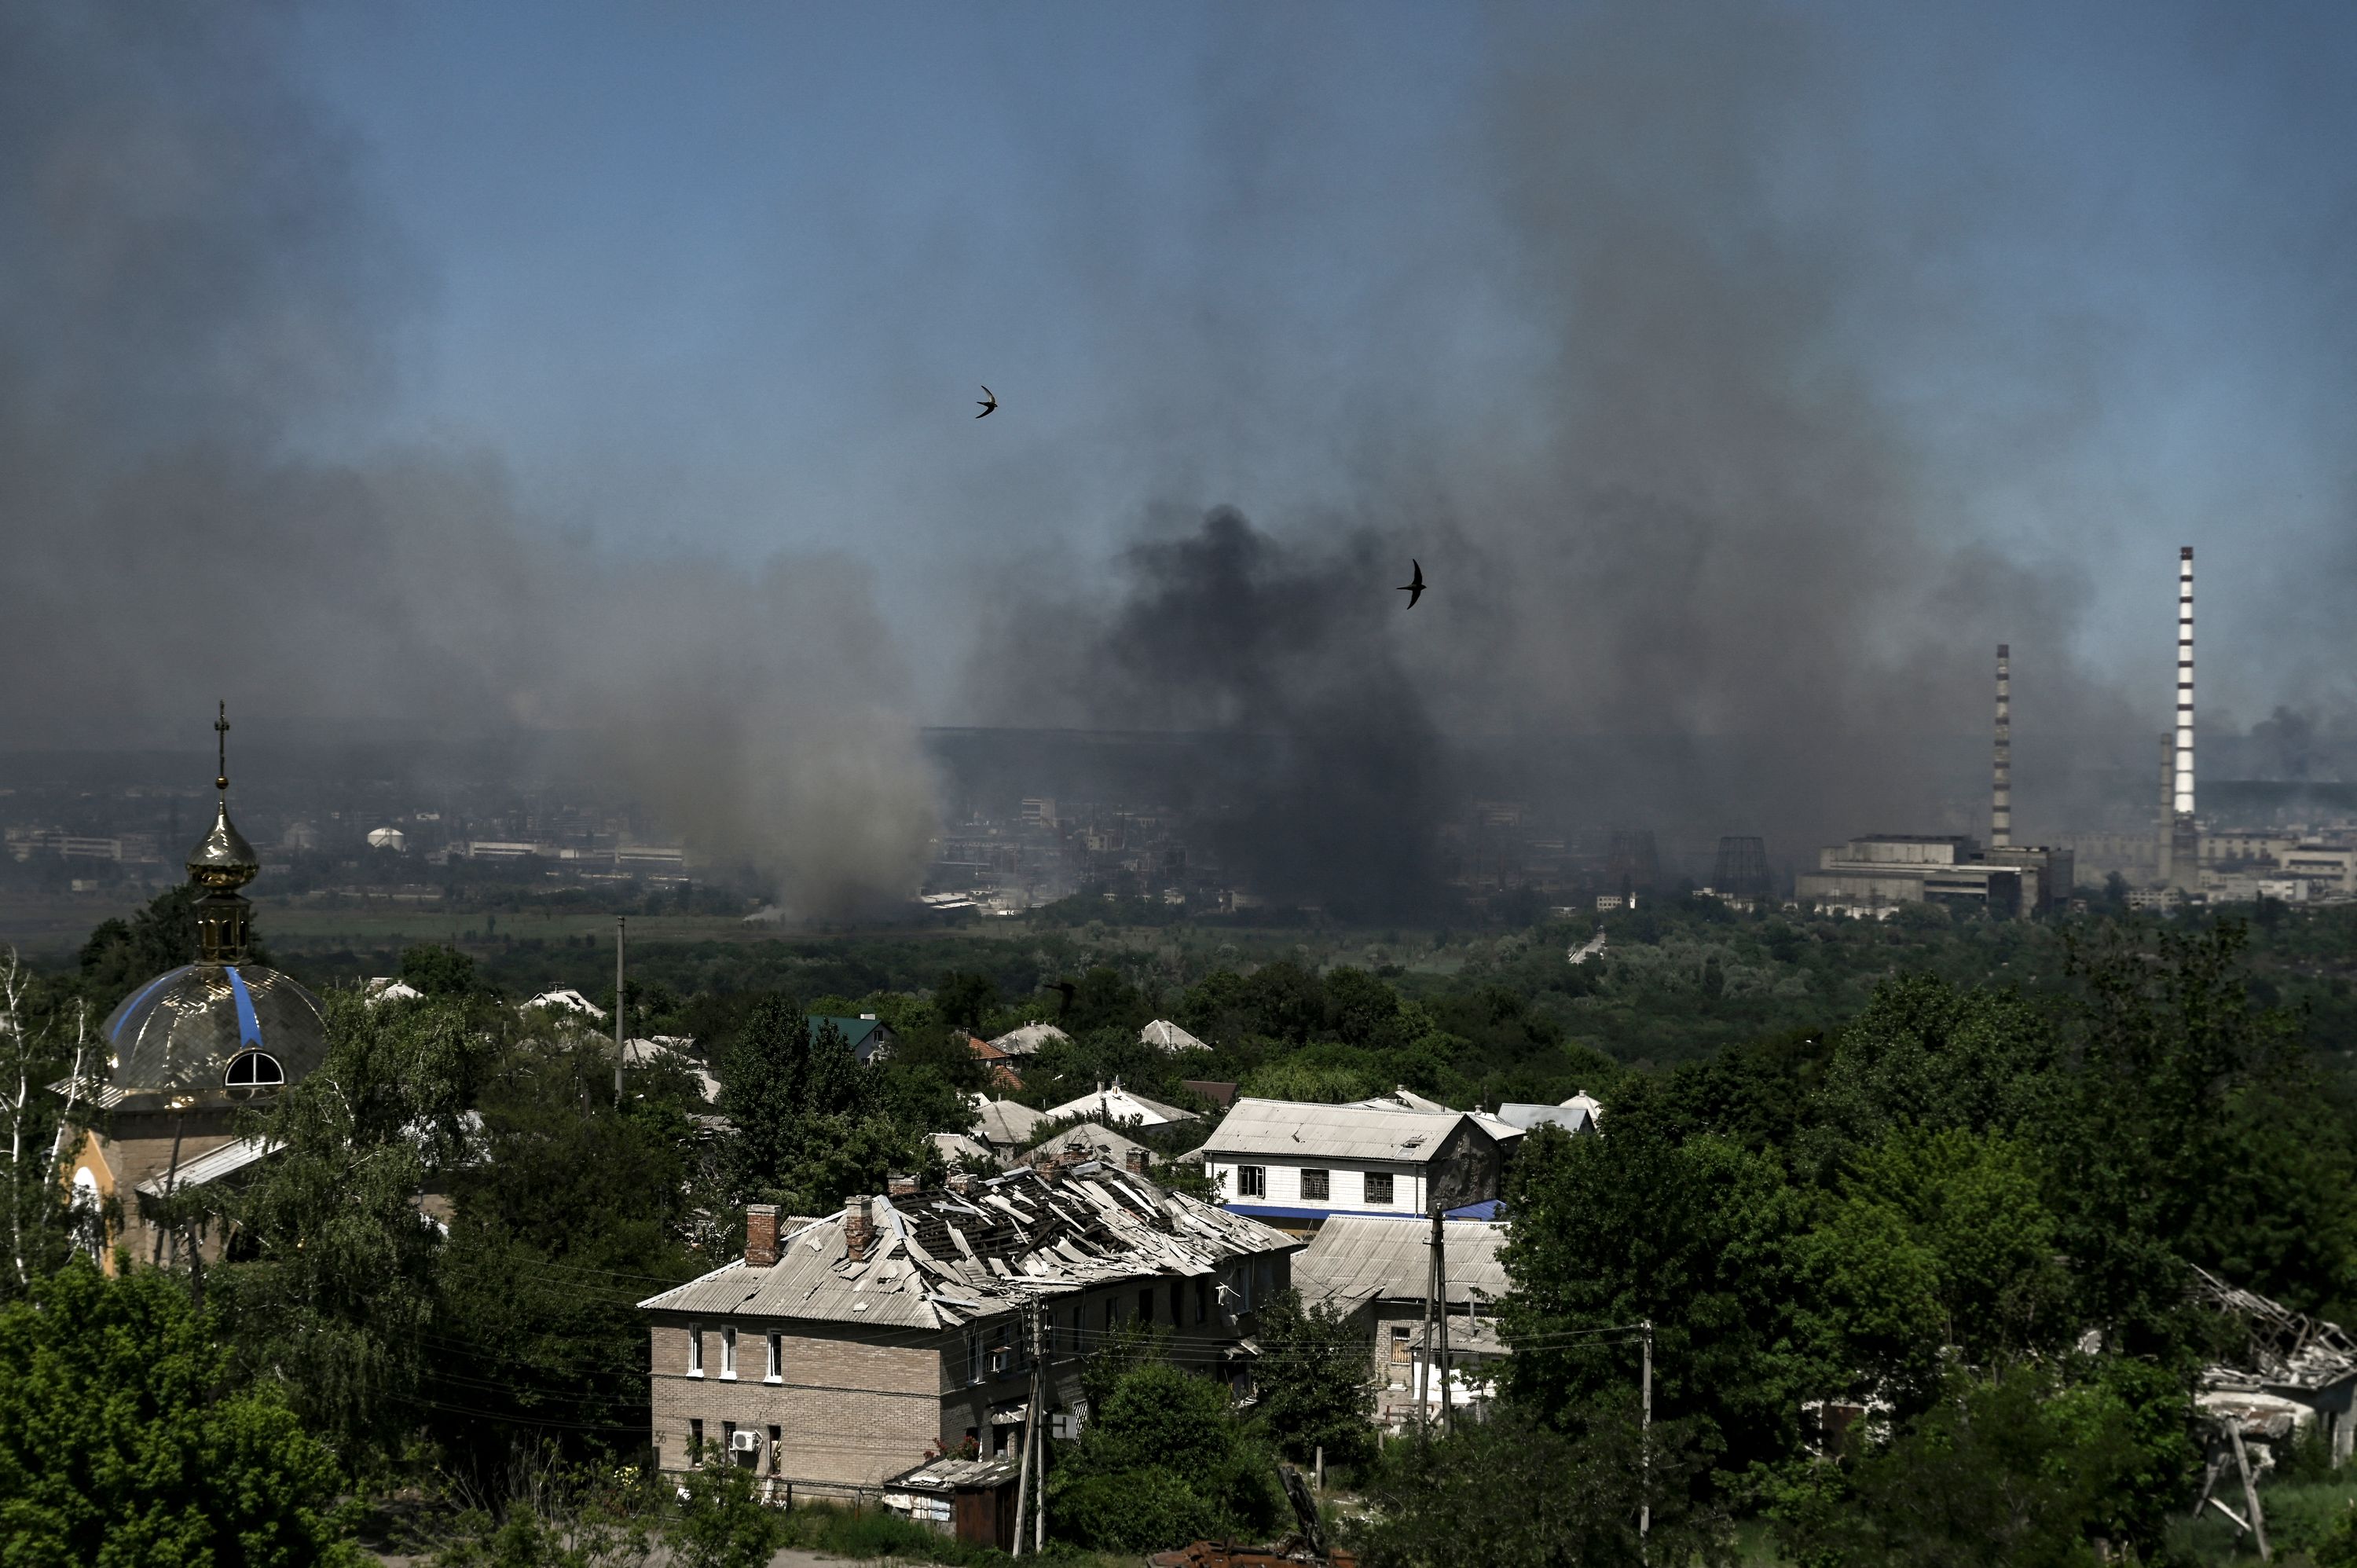 Fierce fighting continues in critical city of Severodonetsk, Ukrainian officials say